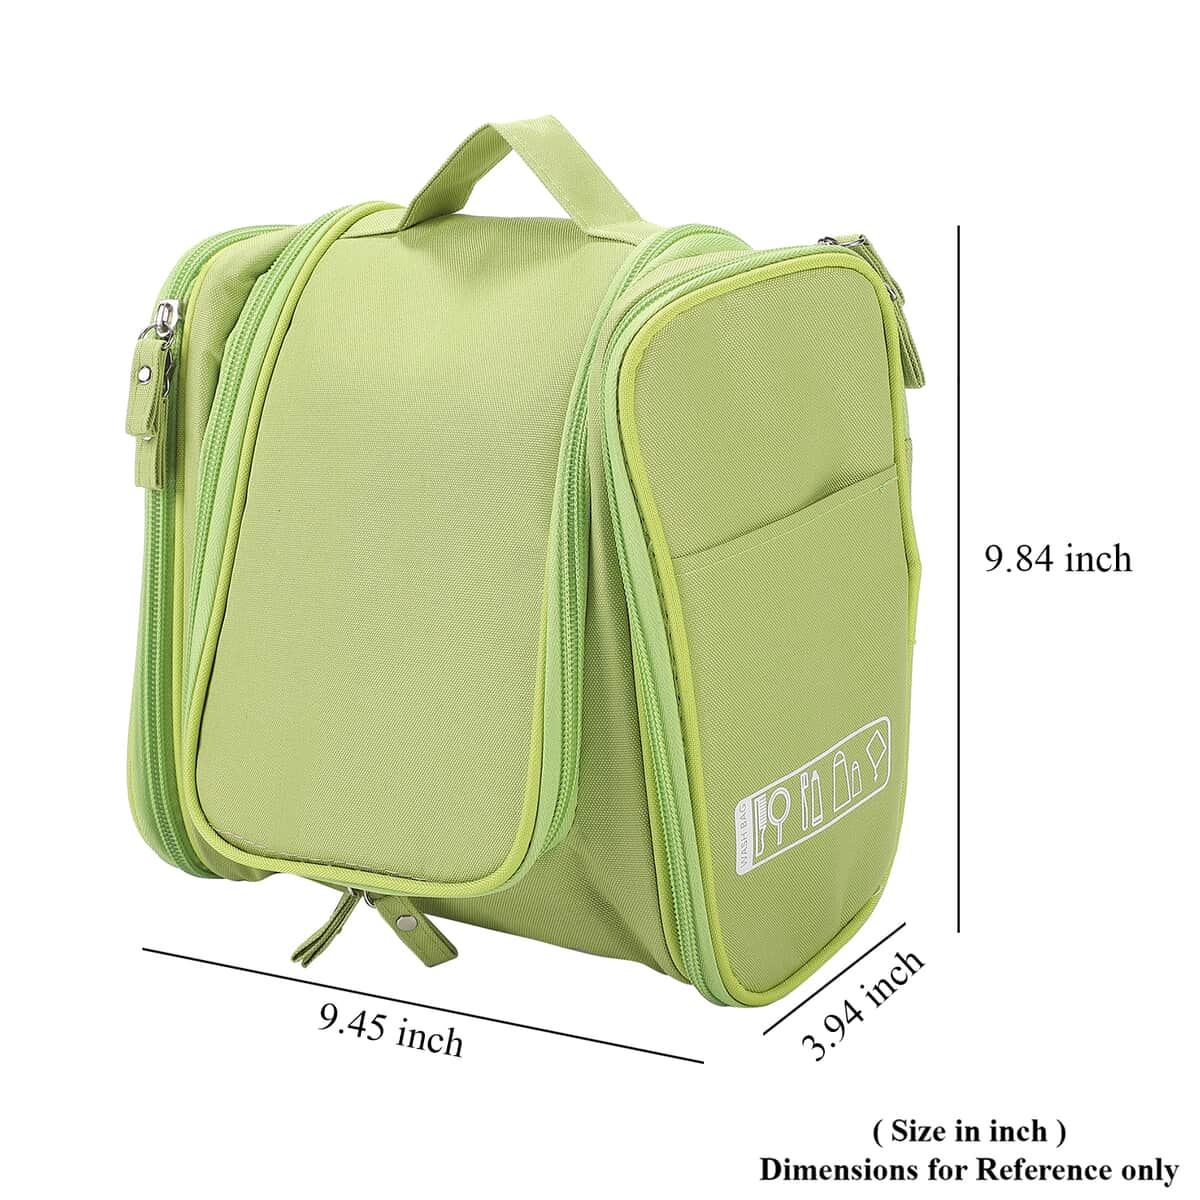 HOMESMART Green Travel Toiletry Bag (9.45"x9.84"x3.94") image number 5